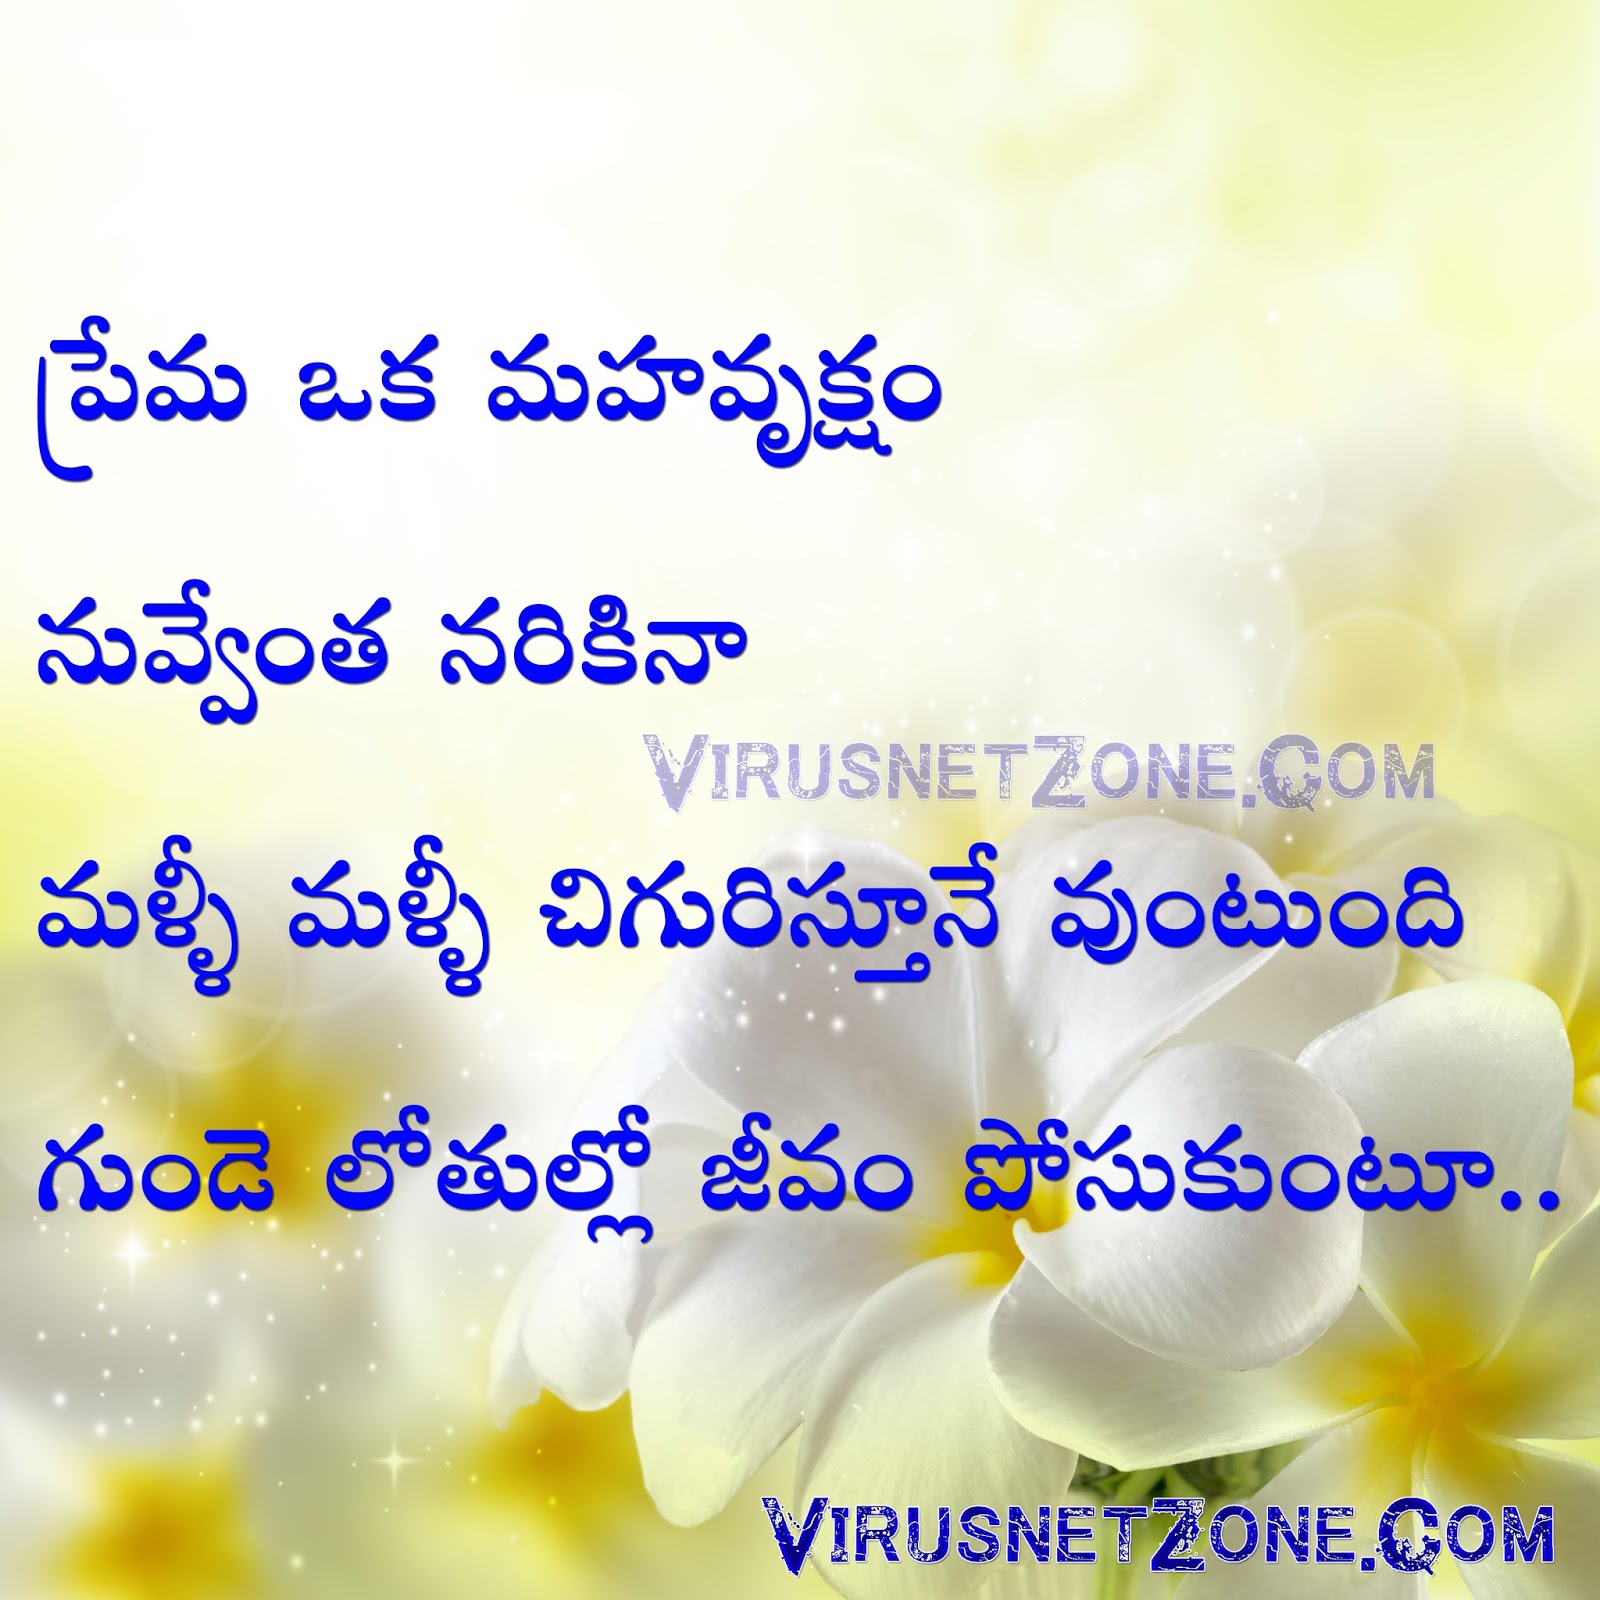 nice telugu love sms for boy friend Best telugu love sms for girl friend Cool love sms for youth Telugu heart touching love sms quotes